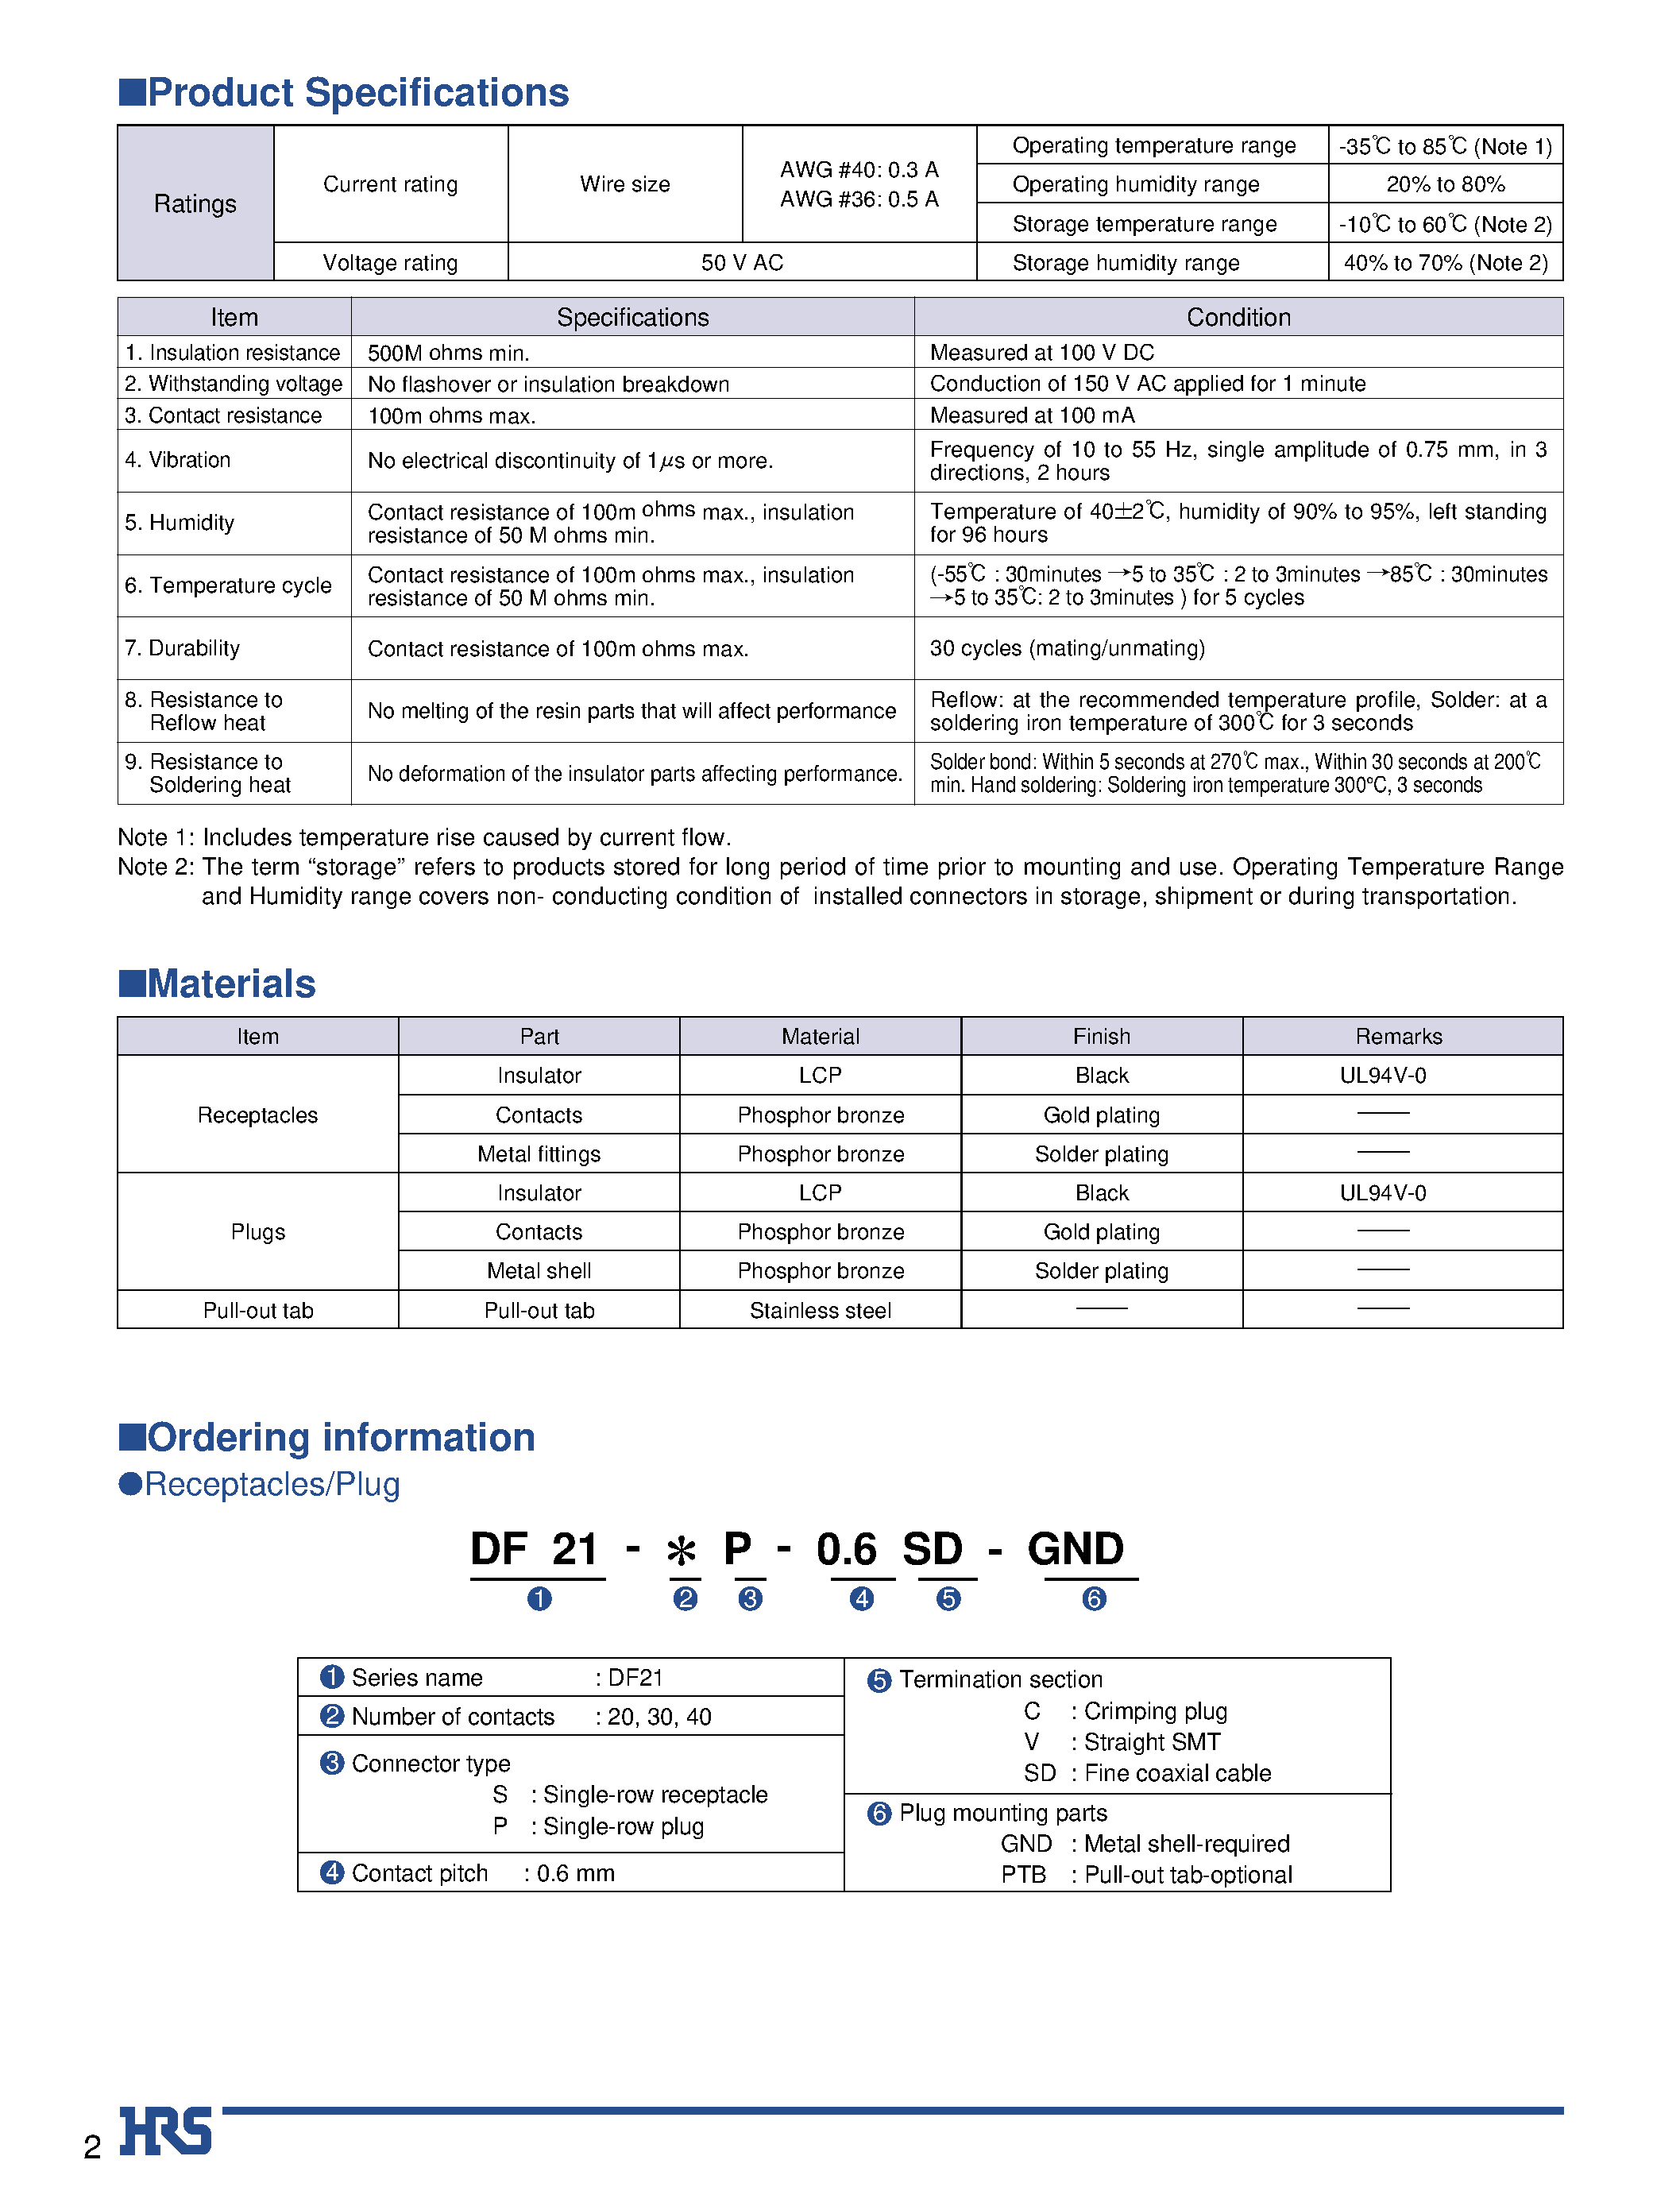 Datasheet DF21-20P-0.6PTB - 0.6mm Pitch Board-to-Fine-Coaxial Cable Connectors page 2